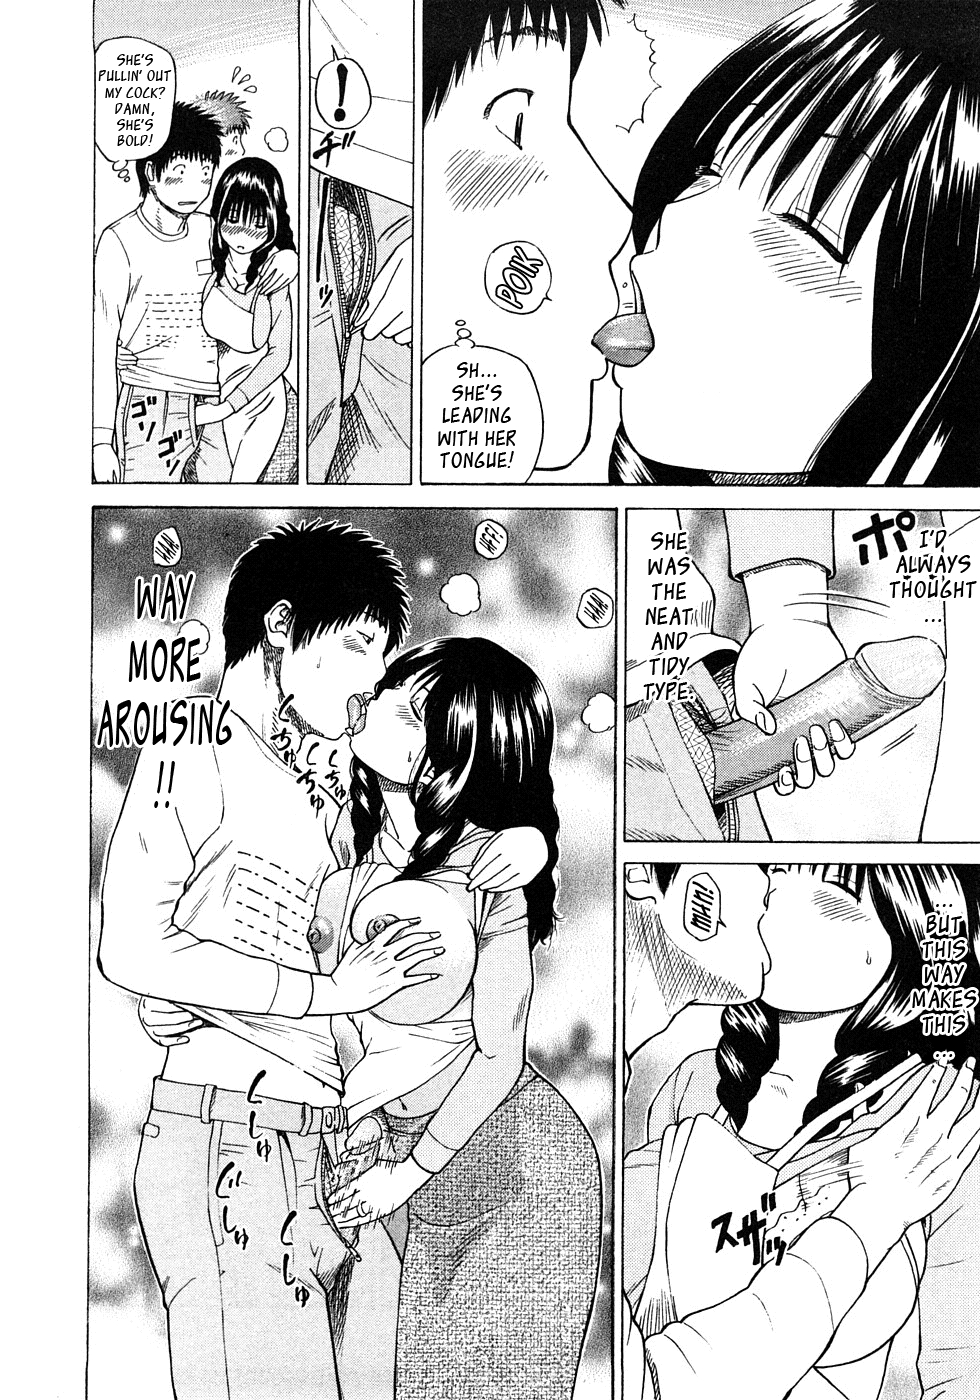 29 Year Old Lusting Wife-Chapter 2-Sexy Sister-in-law-Hentai Manga Hentai Comic